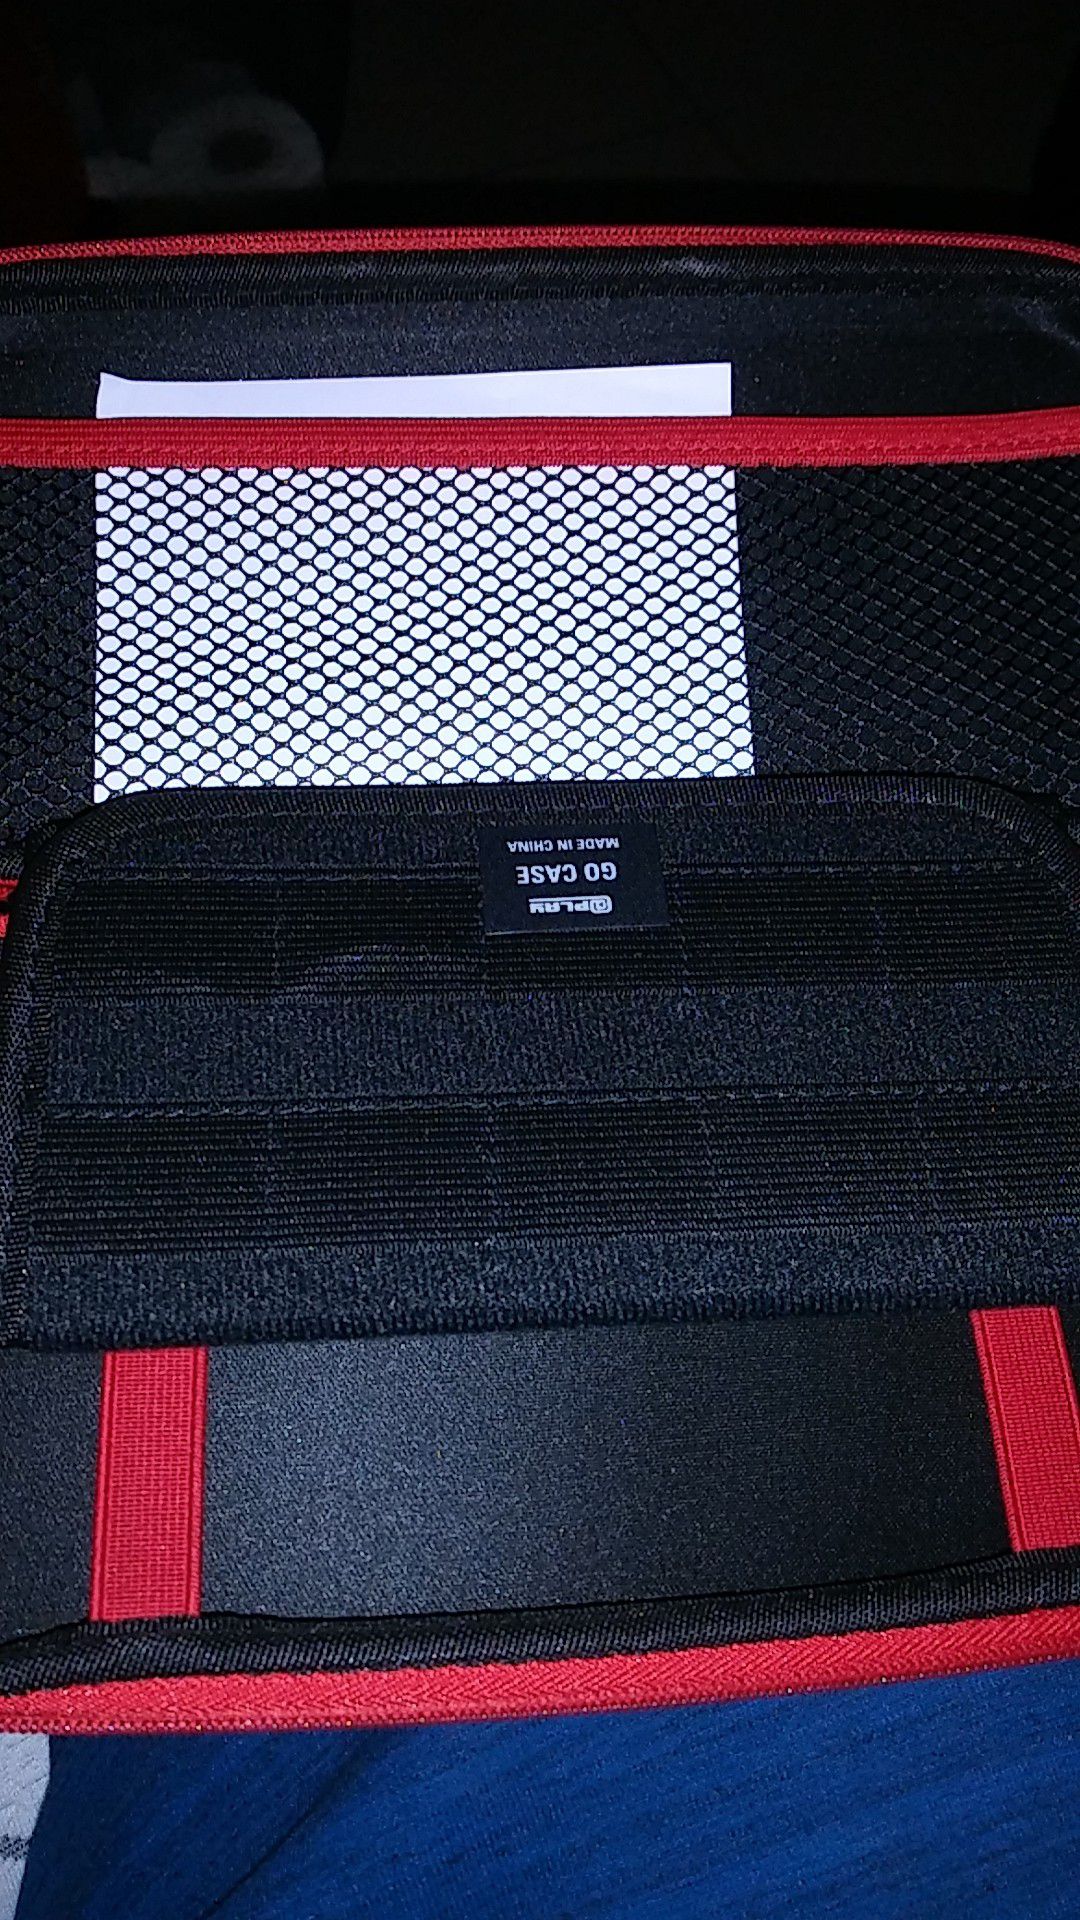 Nintendo switch carry case